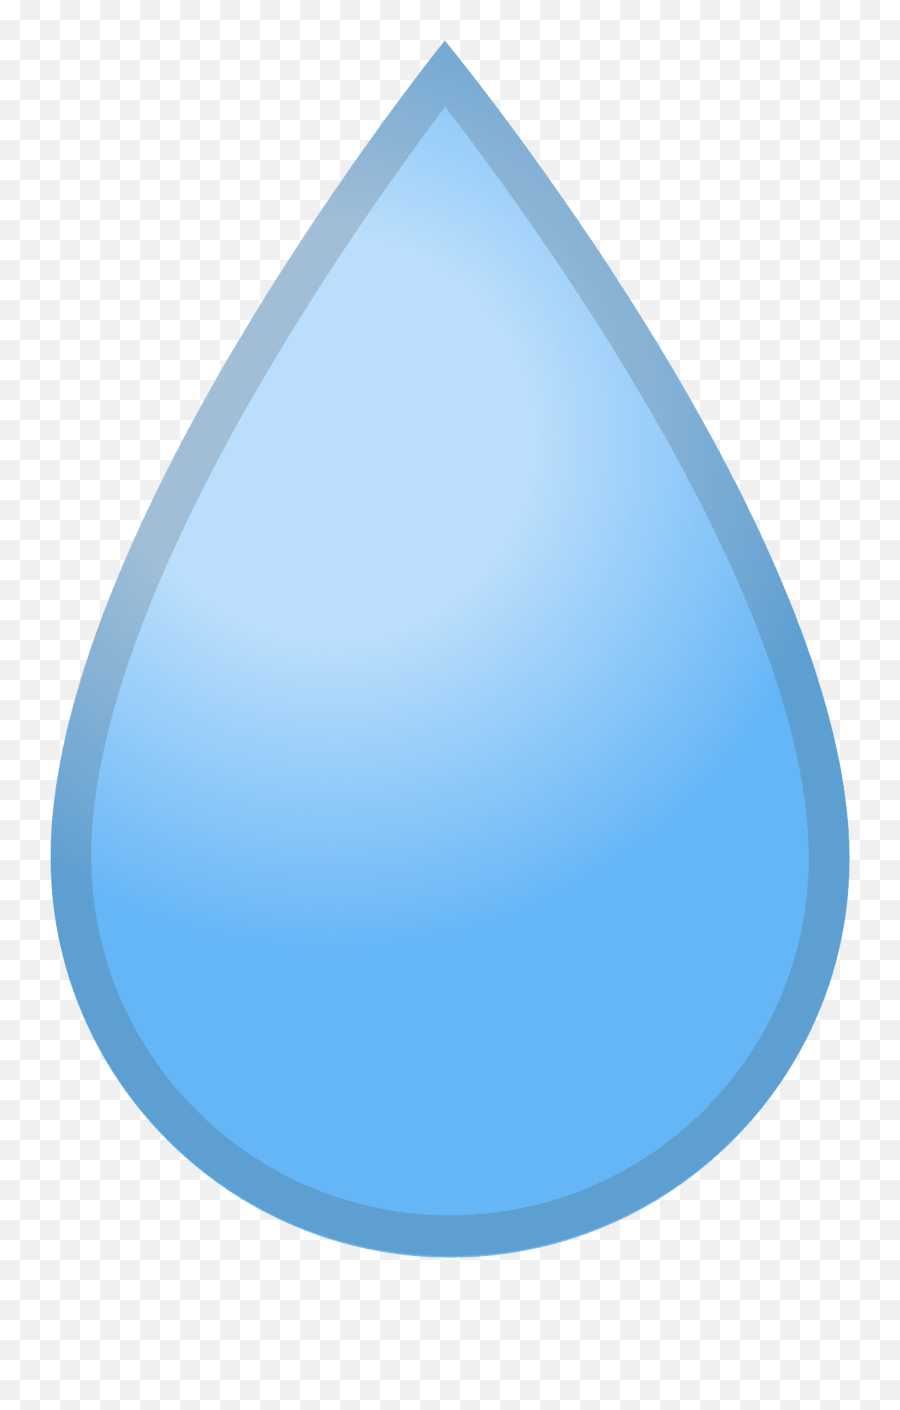 Droplet Emoji Meaning With Pictures From A To Z - Tear Drop Emoji Transparent,Sweating Emoji